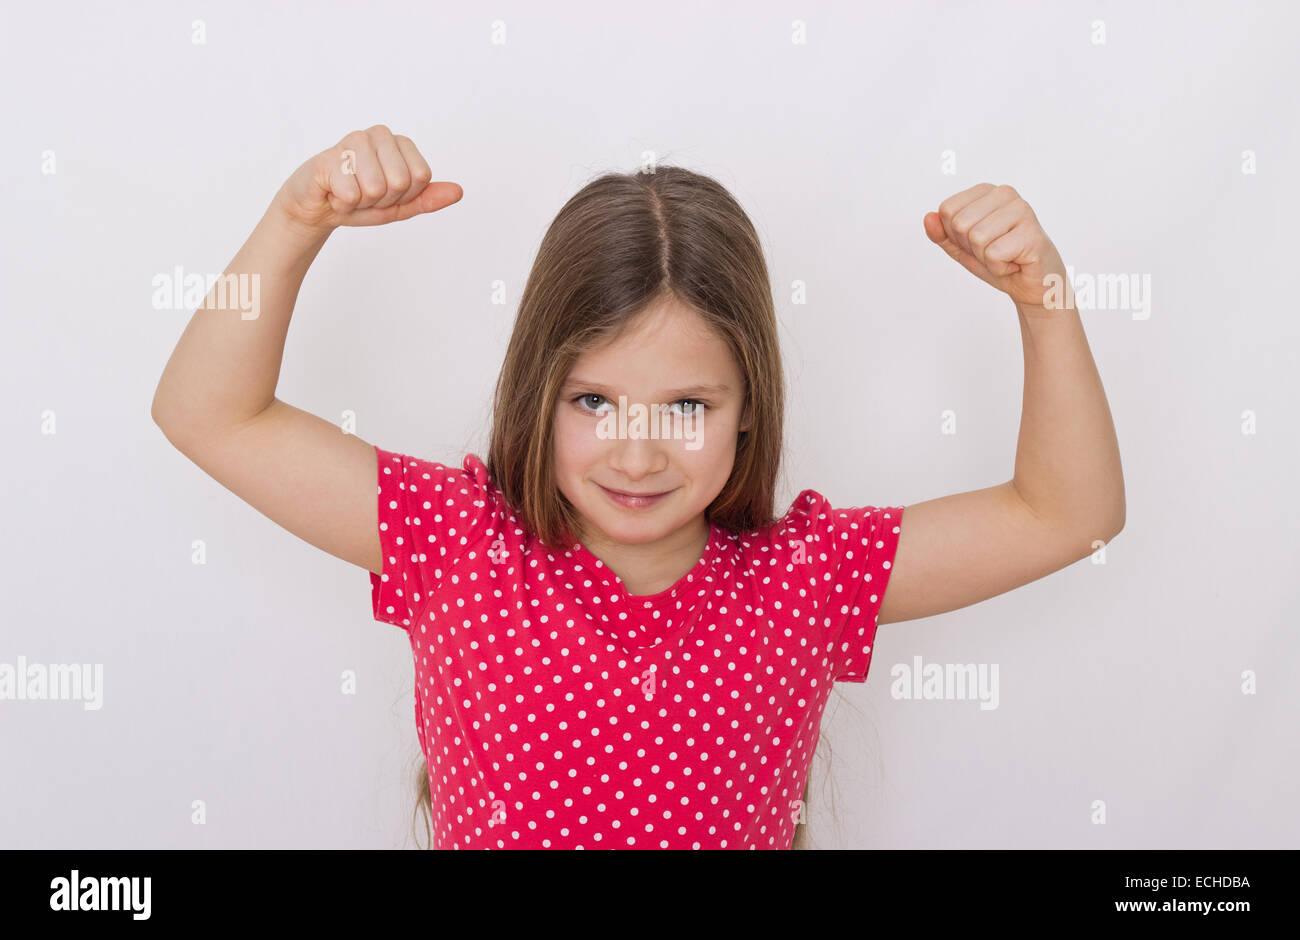 Girl with strong arms Stock Photo